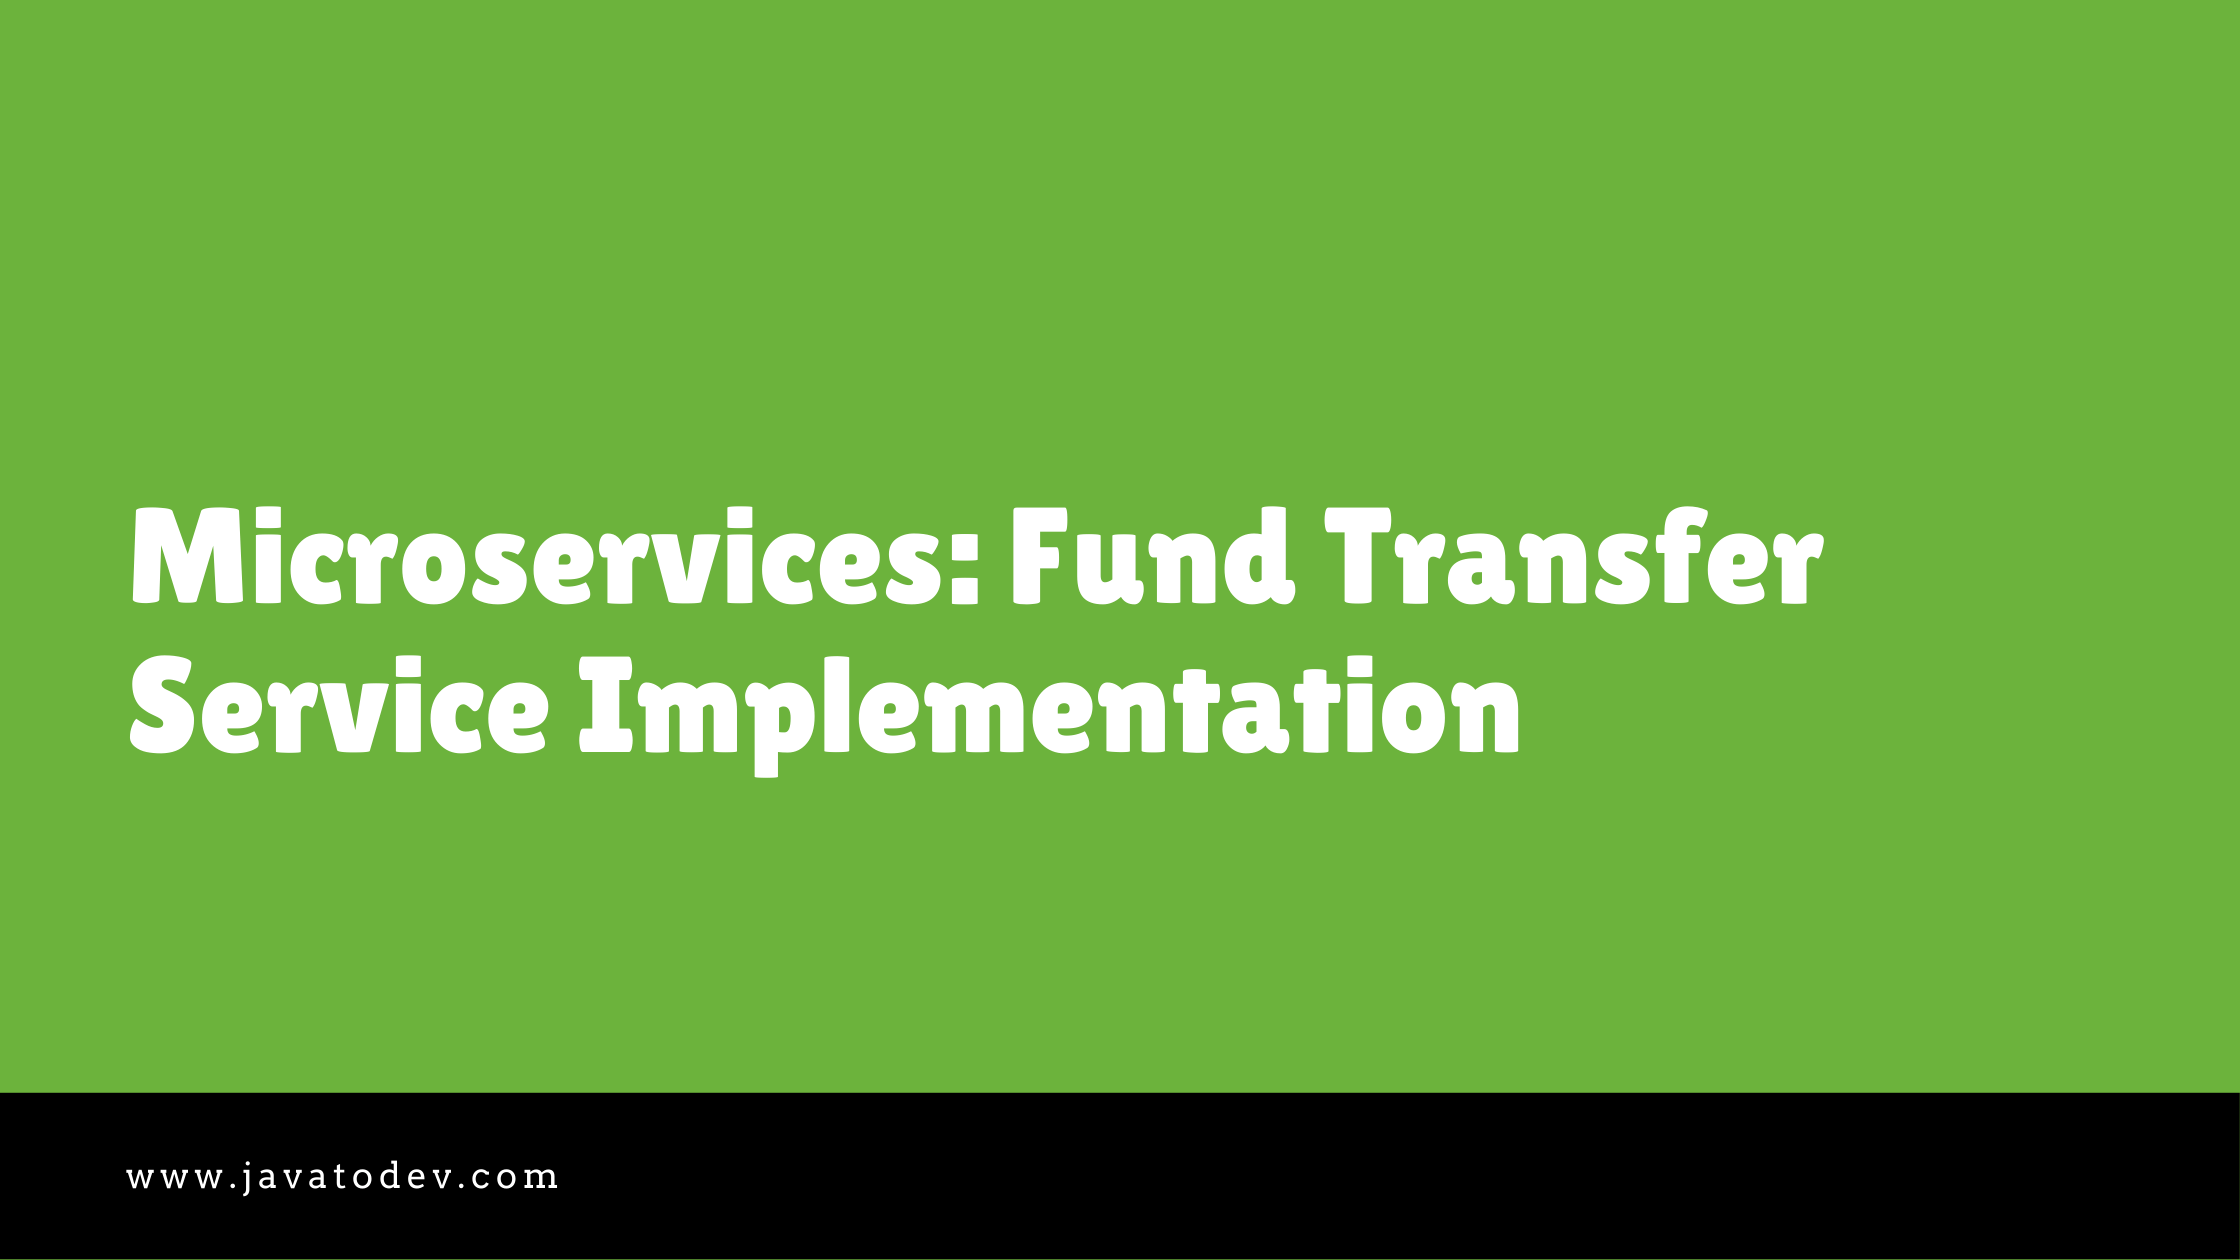 Microservices - Fund Transfer Service Implementation